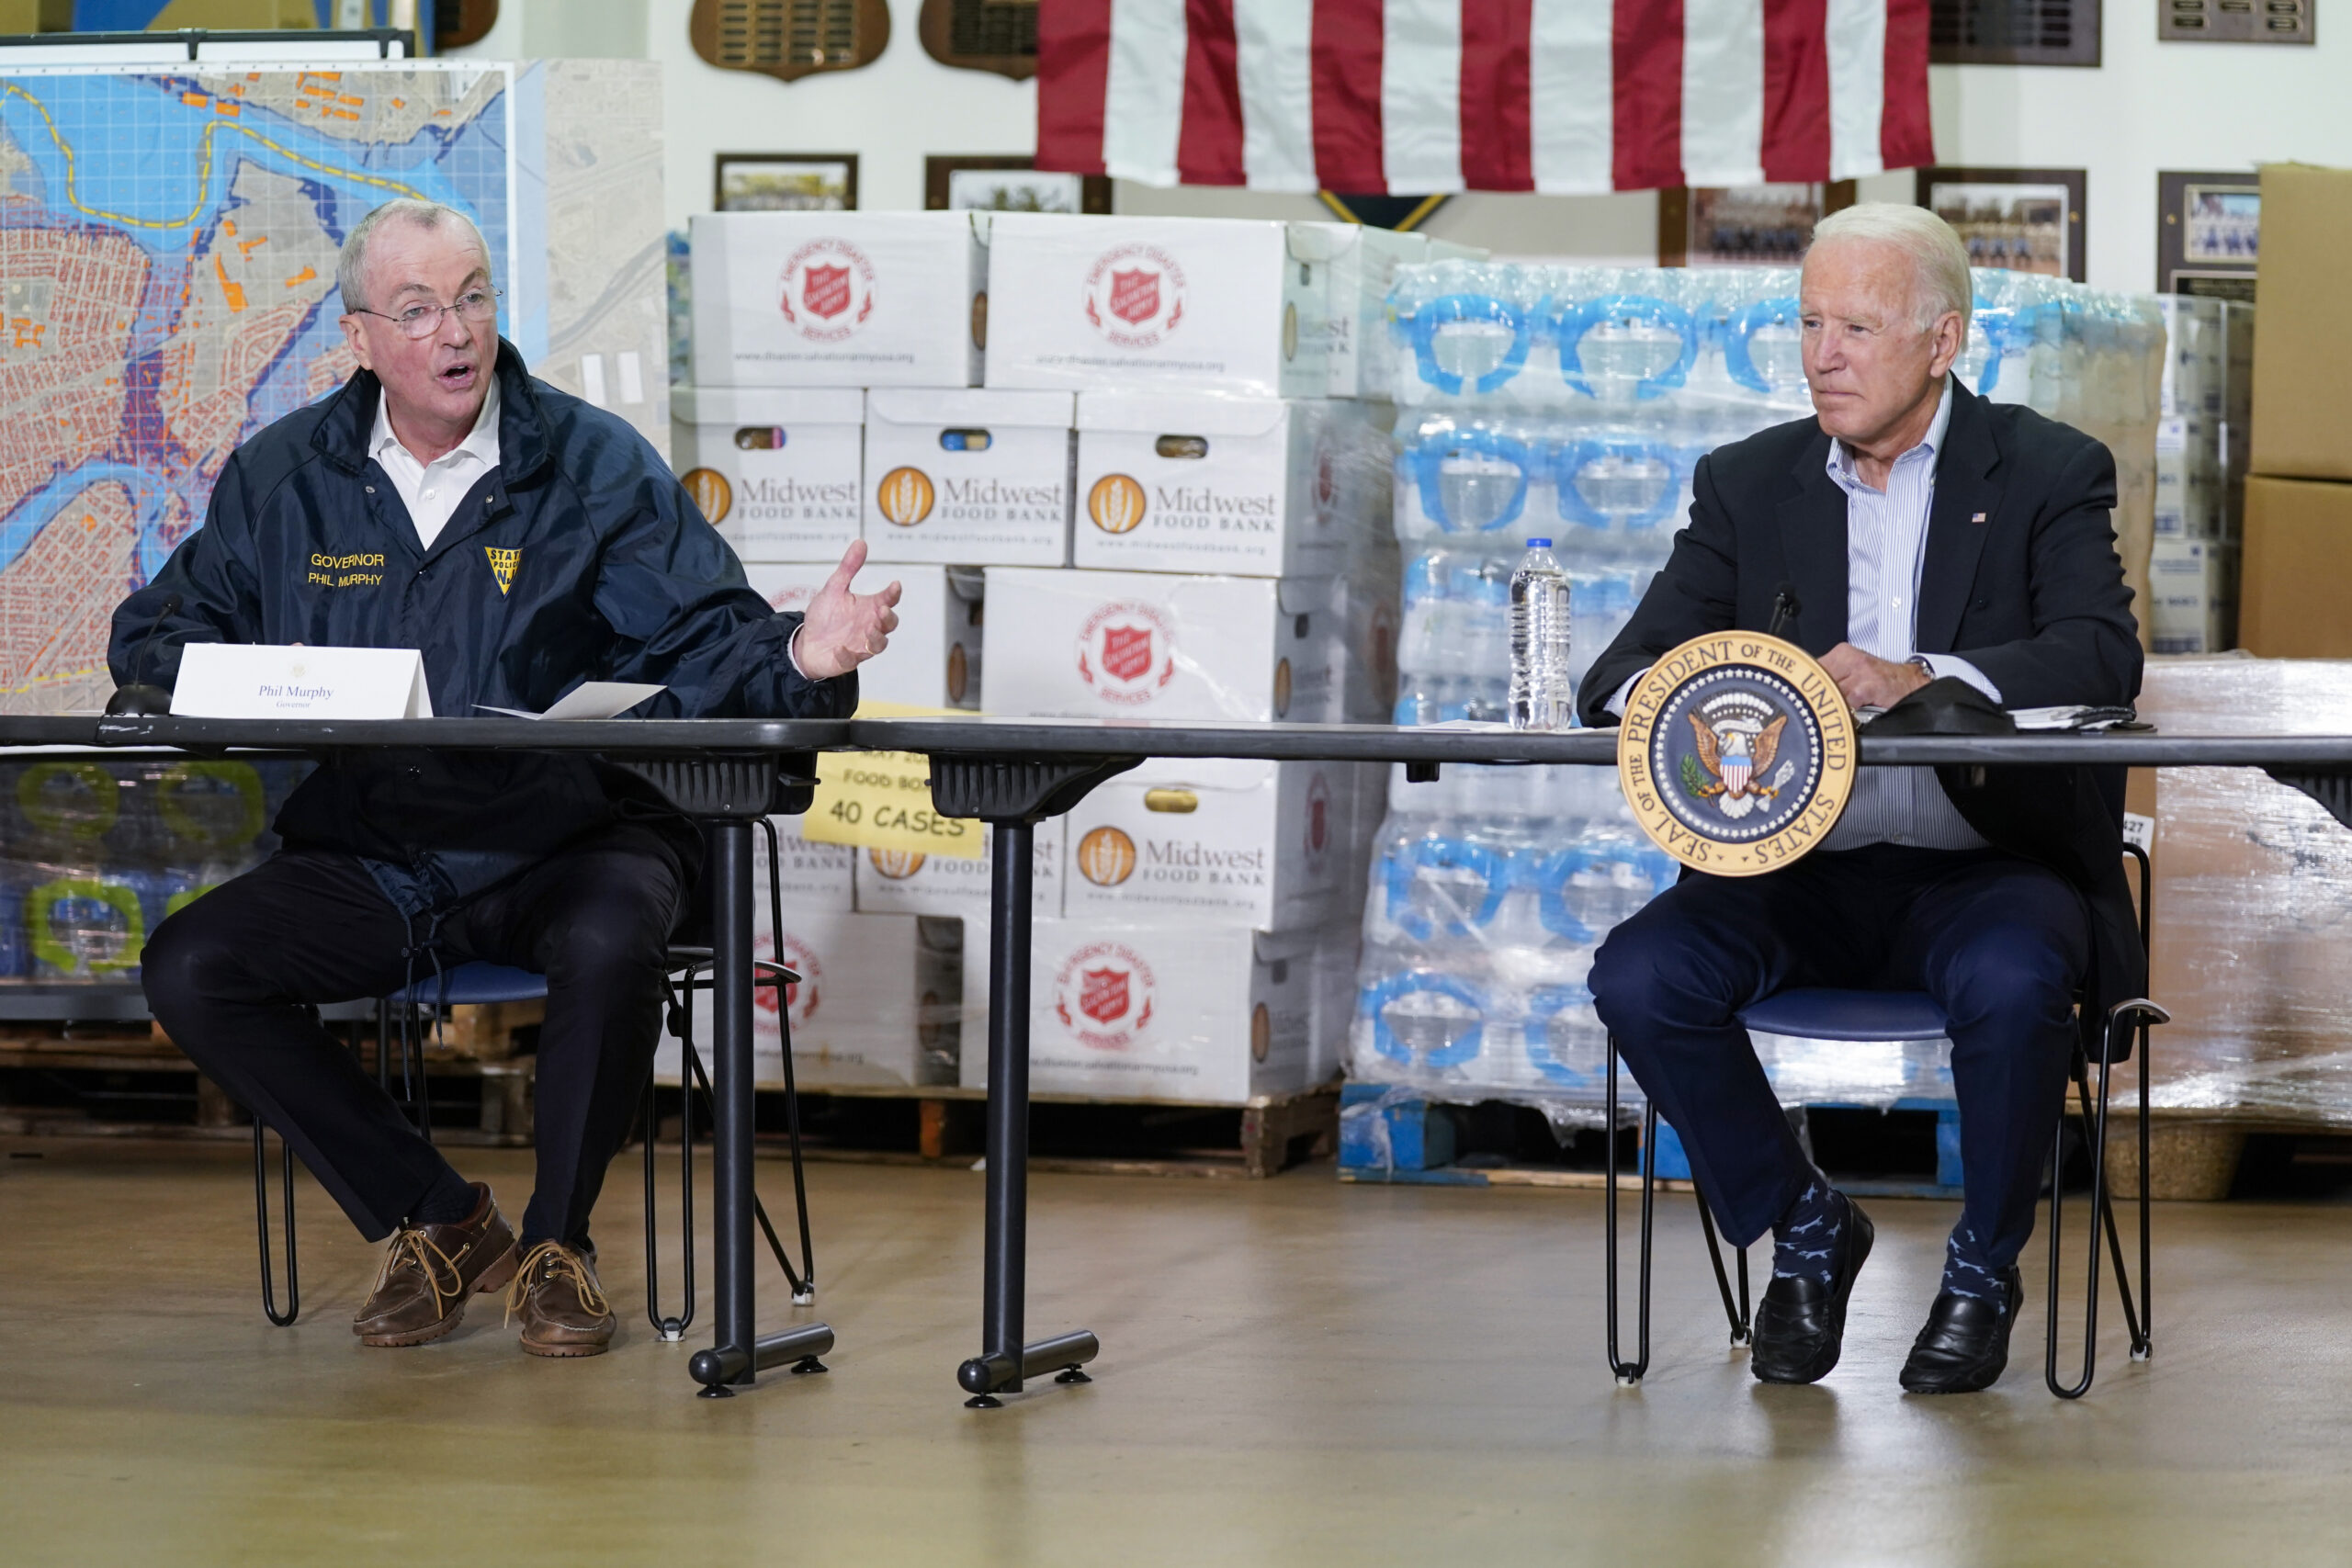 President Joe Biden listens as New Jersey Gov. Phil Murphy, left, speaks during a briefing about the impact of Hurricane Ida, Tuesday, Sept. 7, 2021, in Hillsborough Township, N.J. (AP Photo/Evan Vucci)